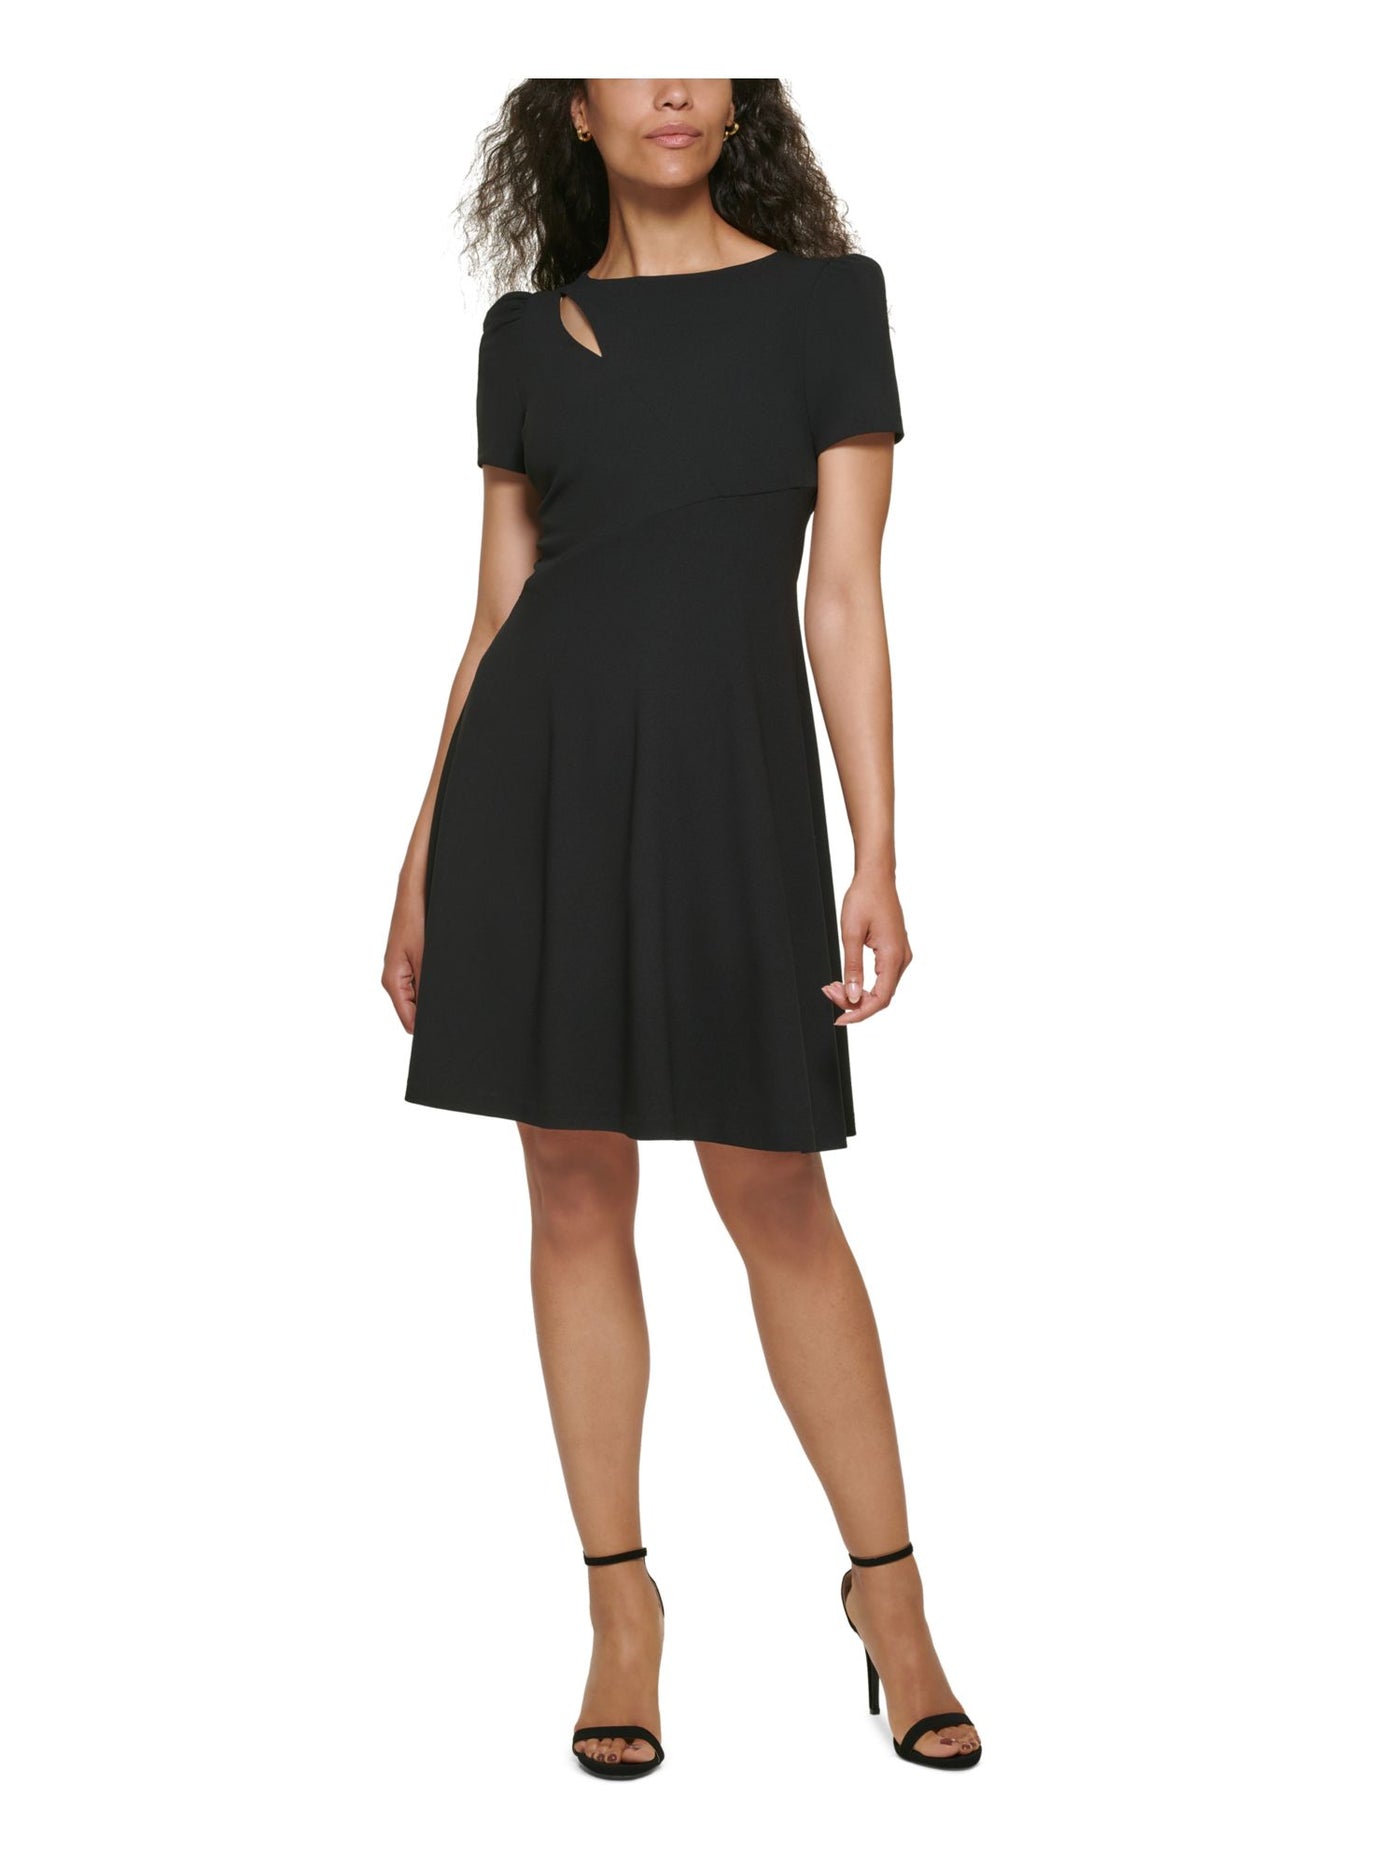 DKNY Womens Black Cut Out Zippered Unlined Asymmetrical Short Sleeve Round Neck Above The Knee Fit + Flare Dress Petites 8P